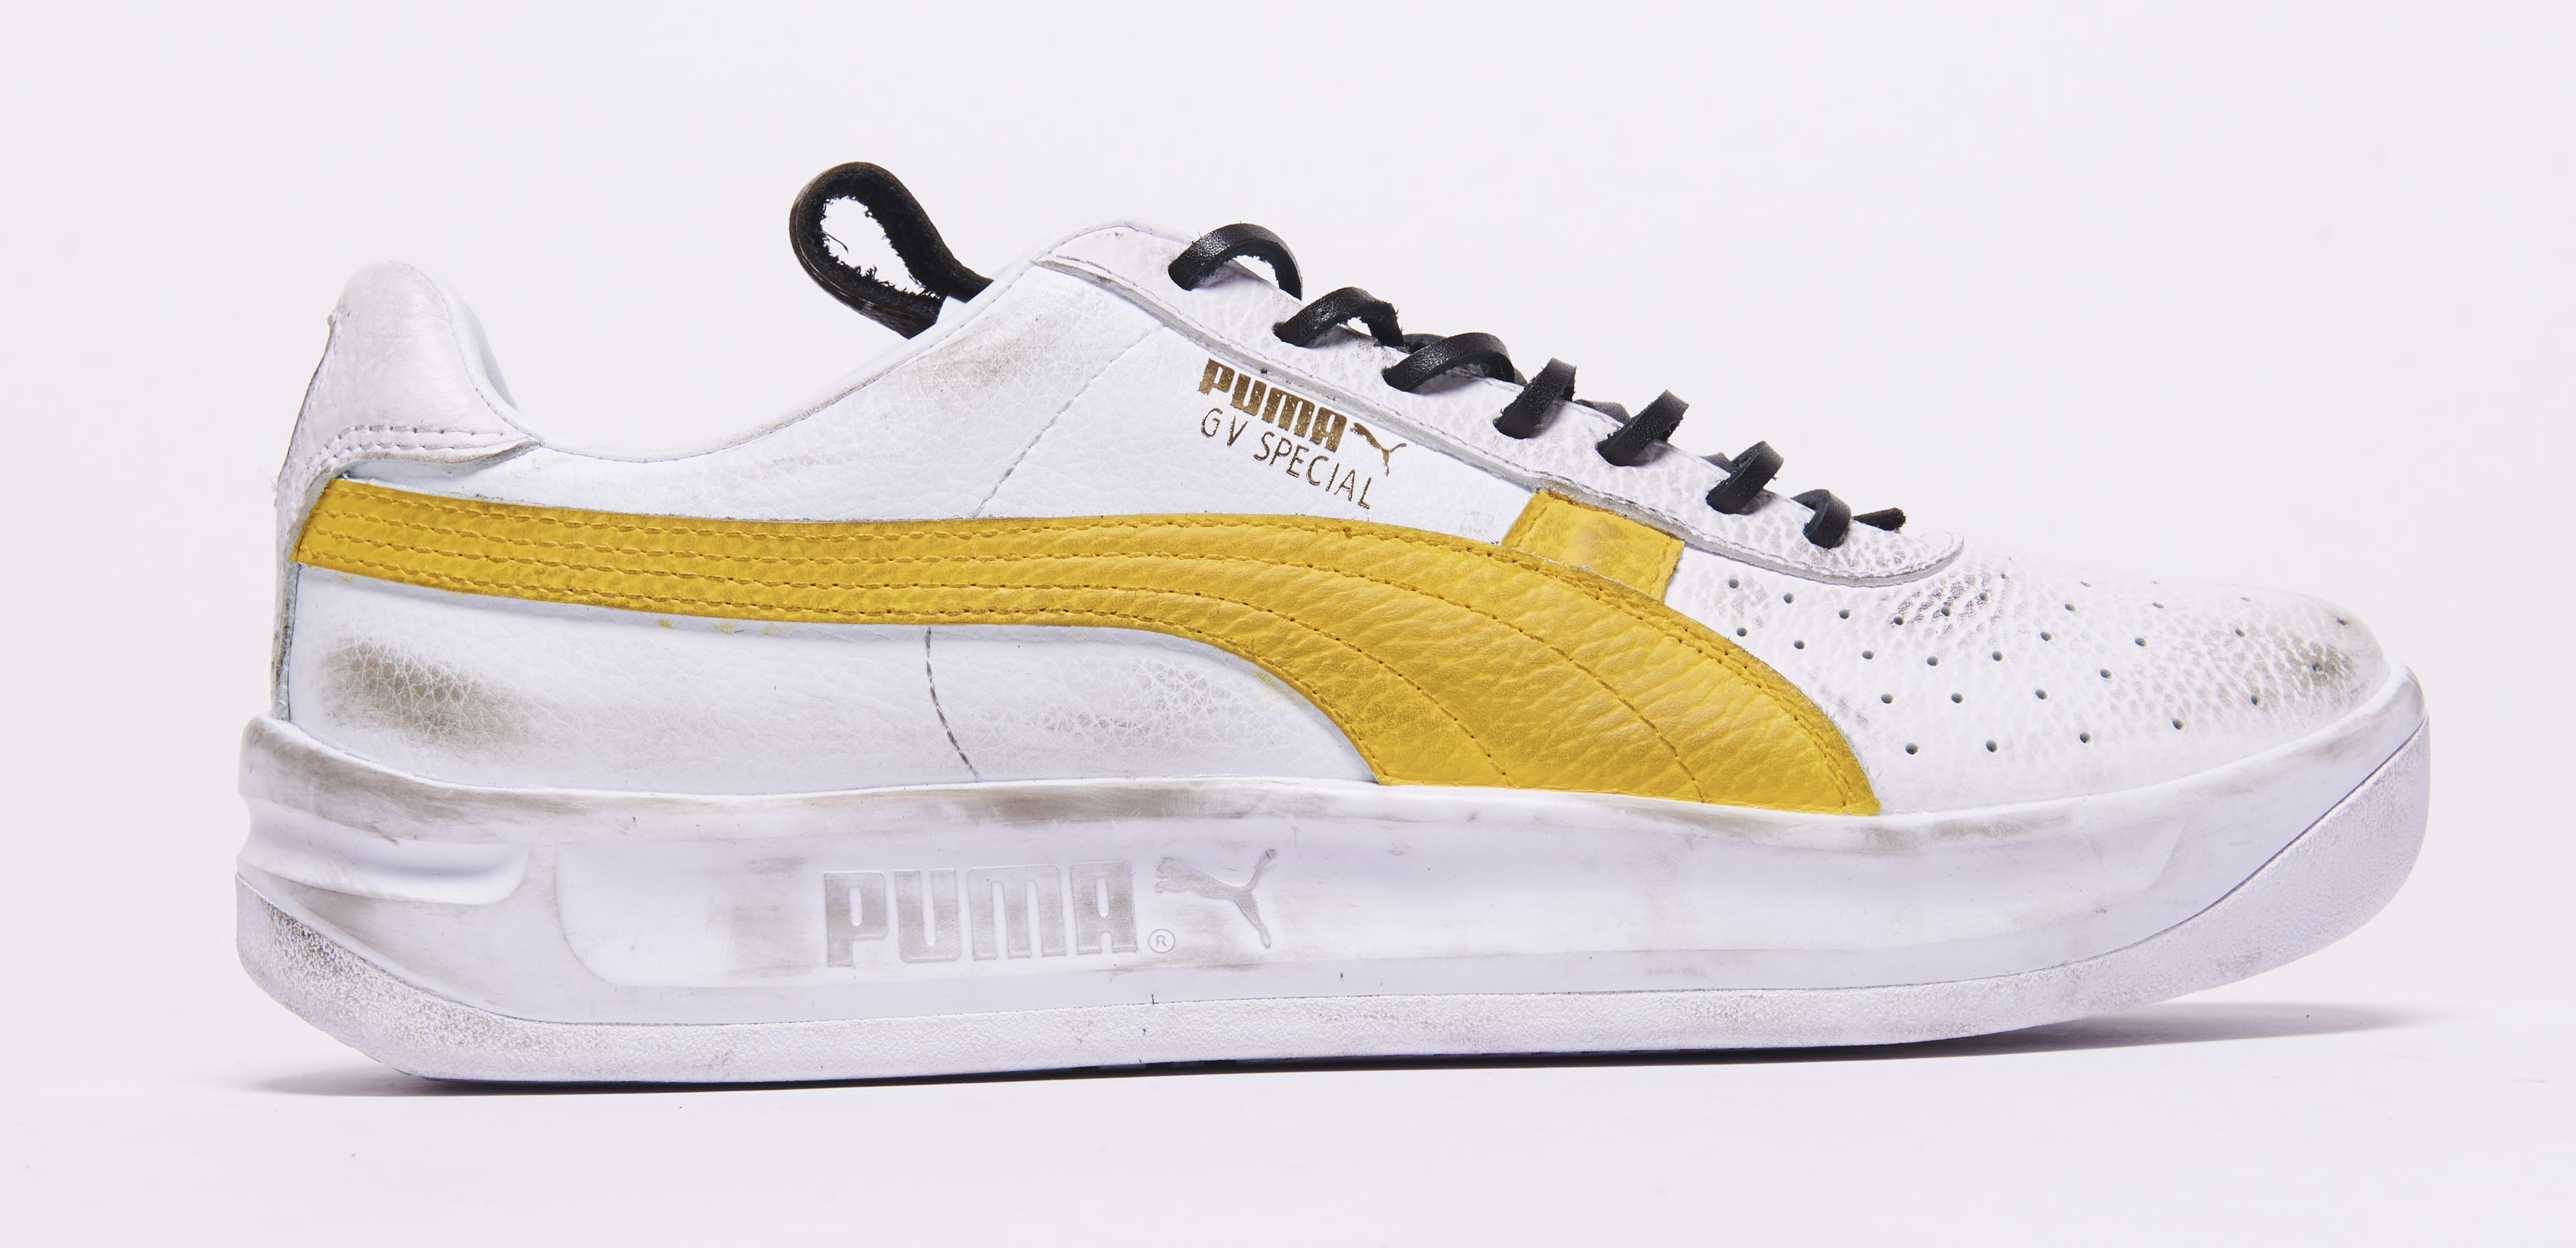 &#x27;The Walking Dead&#x27; x Puma GV Special (Lateral)